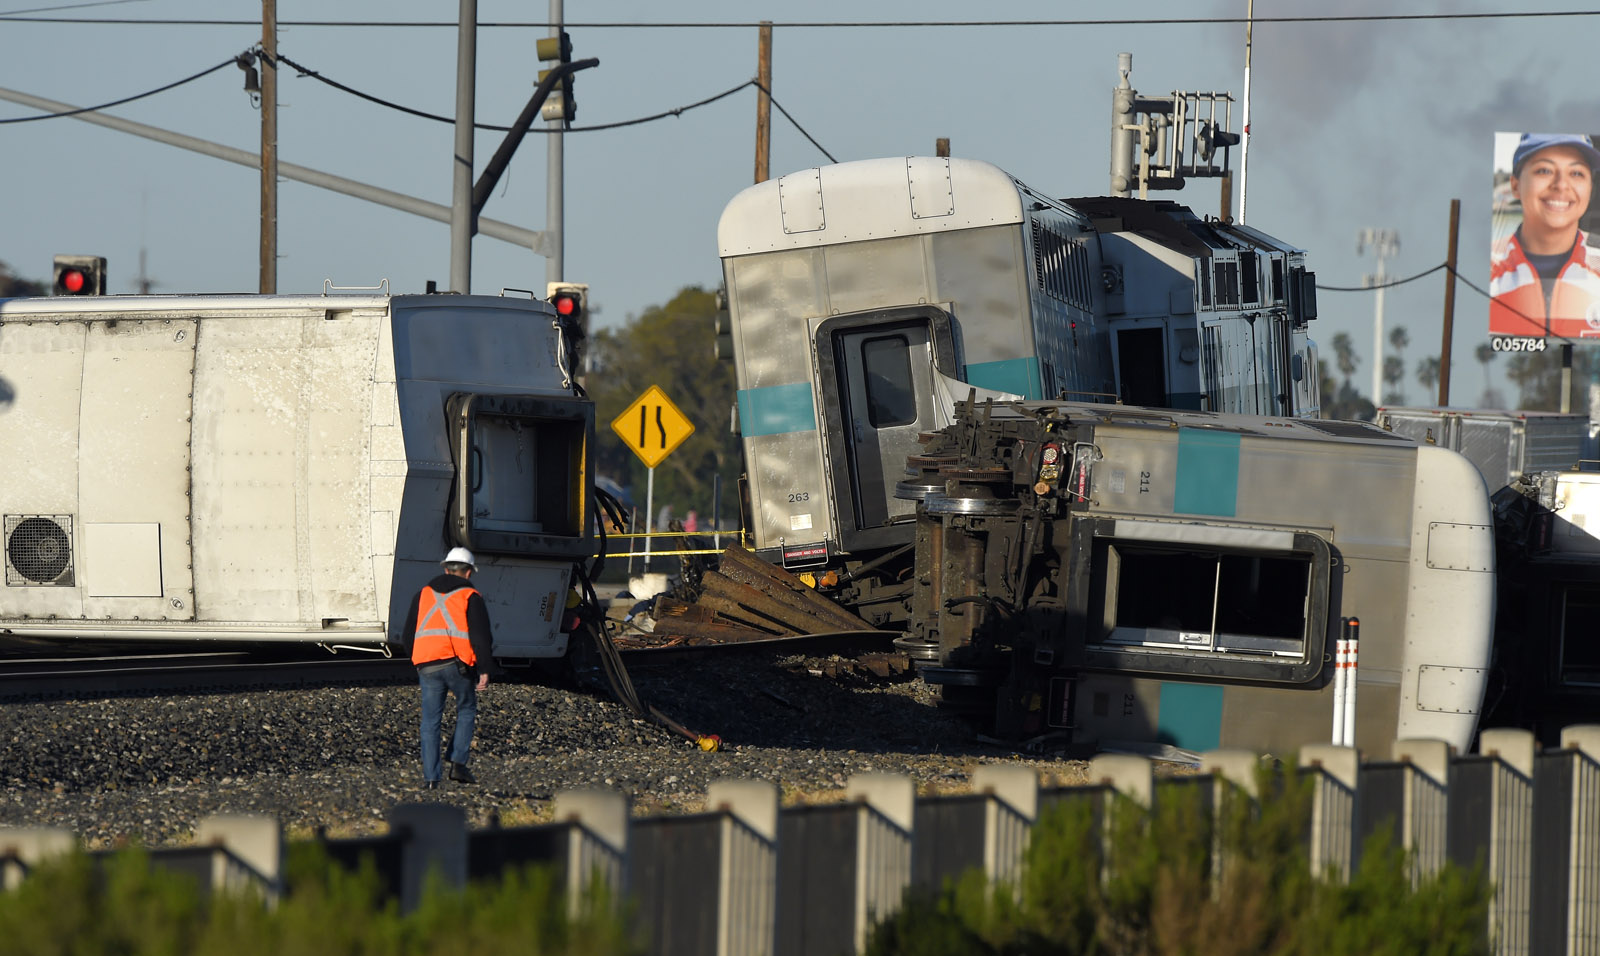 A worker walks along the tracks near the wreck of a Metrolink passenger train that derailed, Tuesday, Feb. 24, 2015, in Oxnard, Calif. Three cars of the Metrolink train tumbled onto their sides, injuring dozens of people in agricultural country 65 miles northwest of Los Angeles. Metrolink spokesman Scott Johnson told the Los Angeles Times that at least 30 people were injured. (AP Photo/Mark J. Terrill)